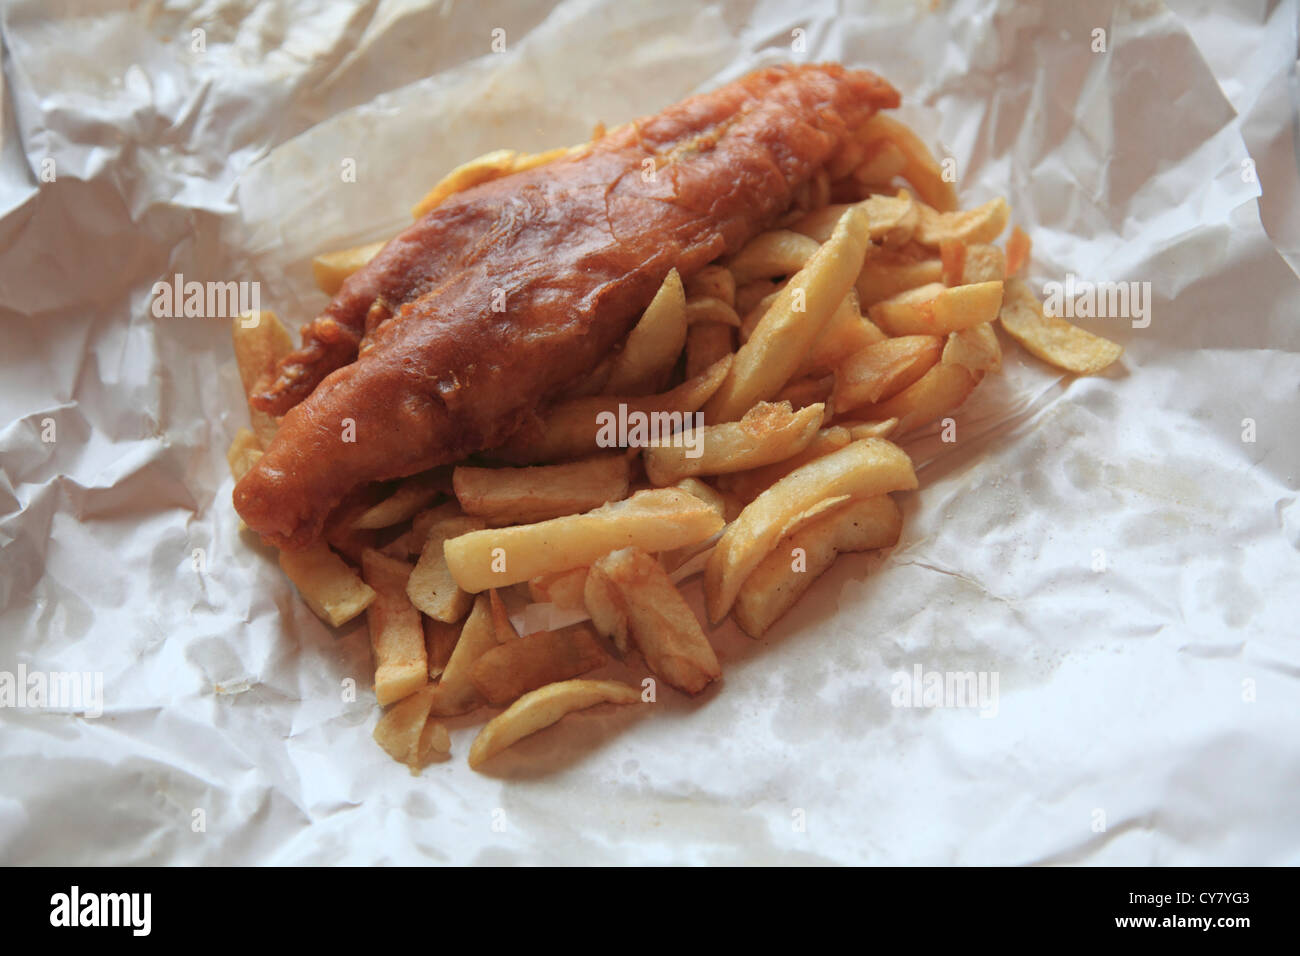 Fish and Chips still in paper they are wrapped in when ordered as take away, Great Britain, United Kingdom.  Stock Photo